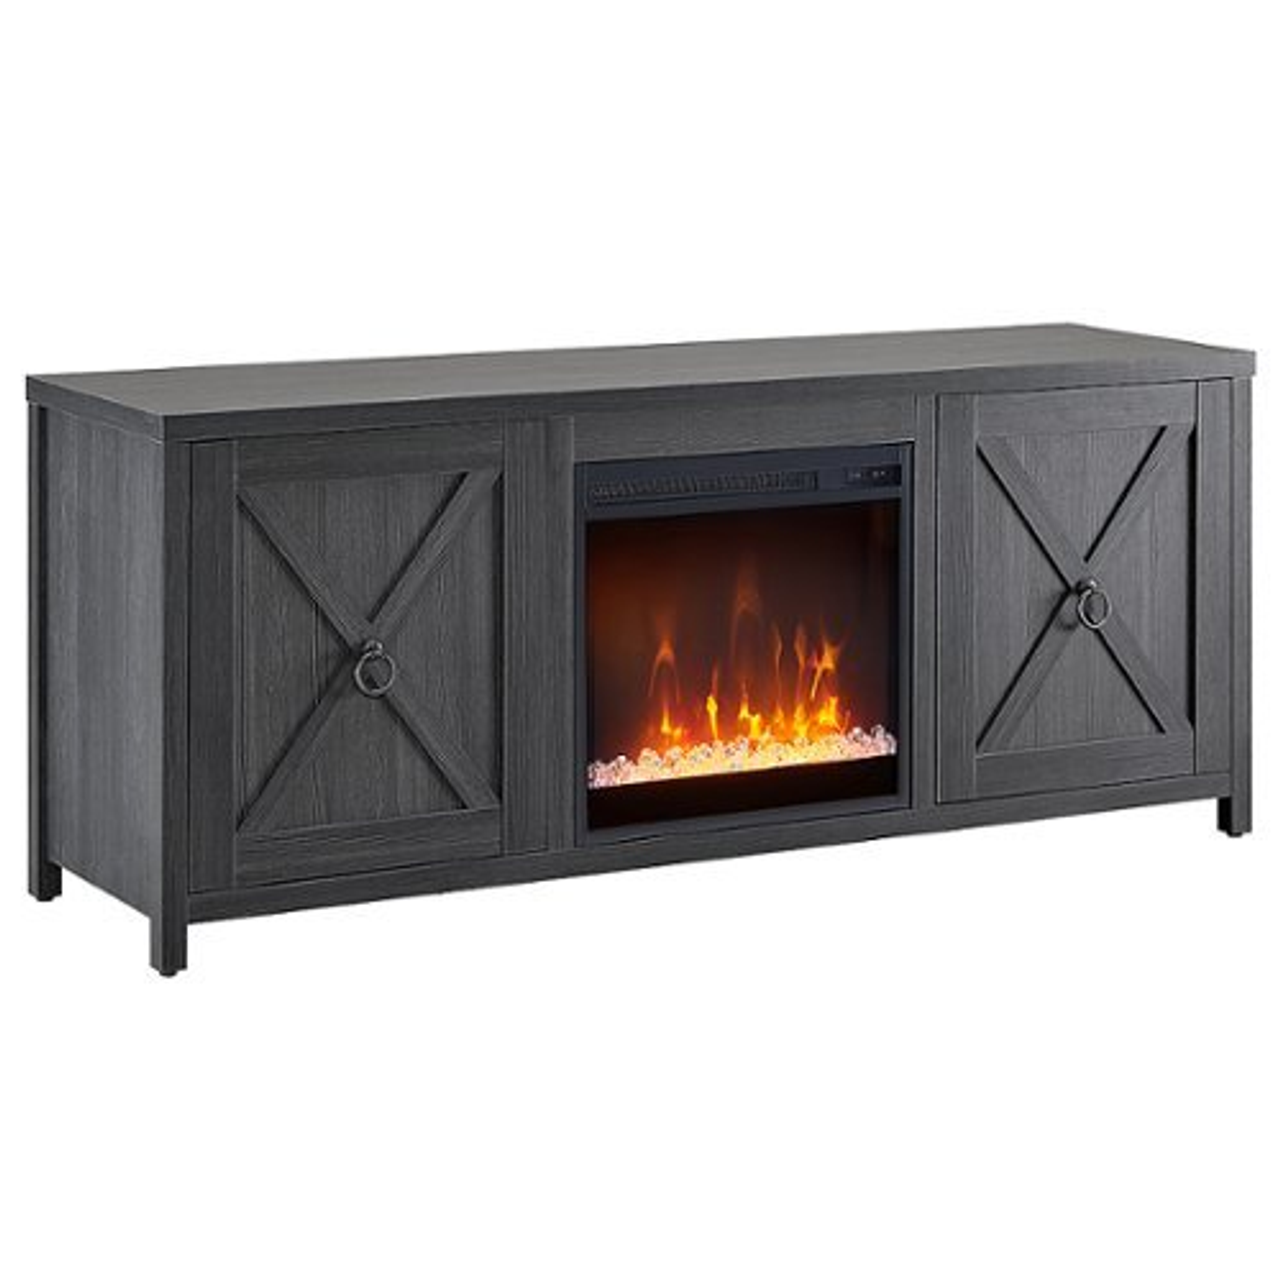 Camden&Wells - Granger Crystal Fireplace TV Stand for TVs up to 65" - Charcoal Gray